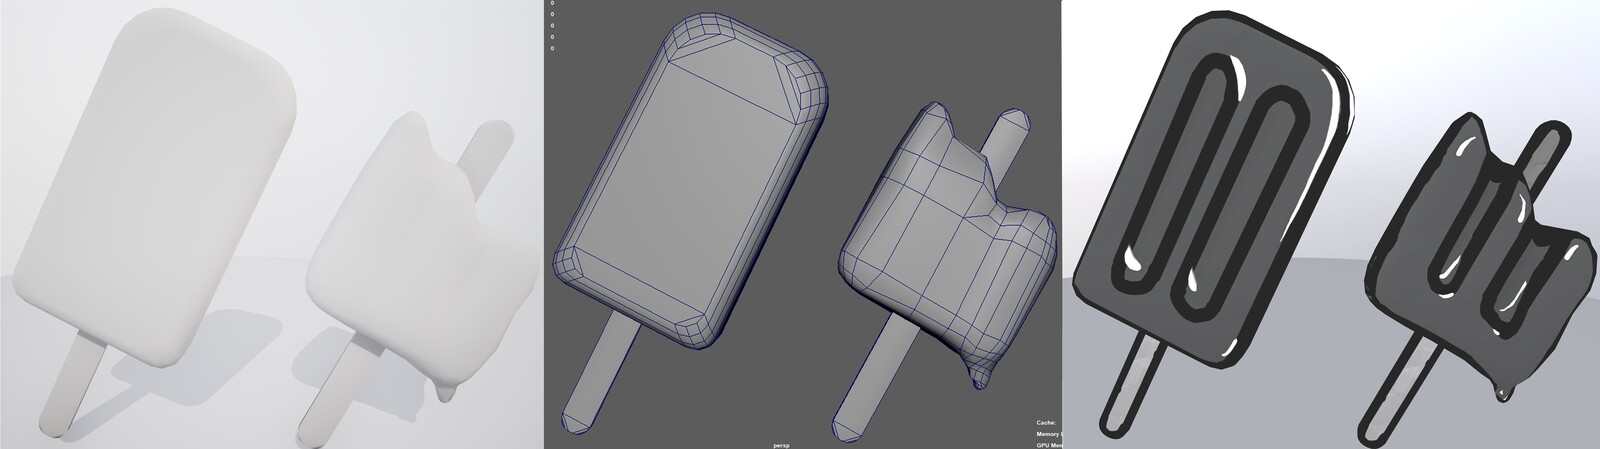 Low-poly of the whole popsicle were made in Maya, and the melted one was also retopologized there.